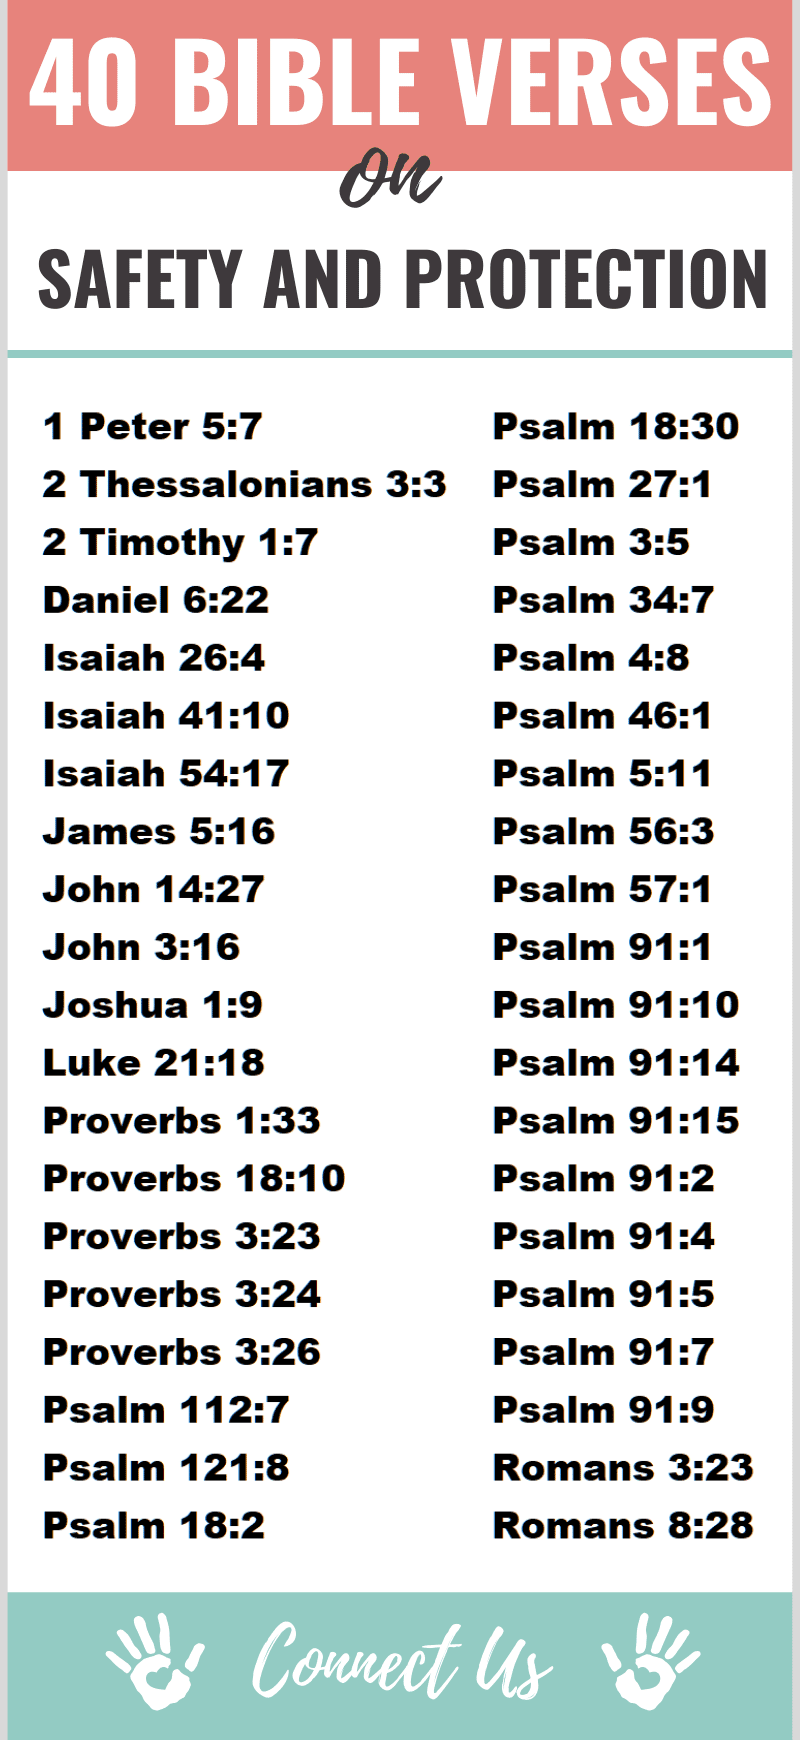 Bible Verses on Safety and Protection